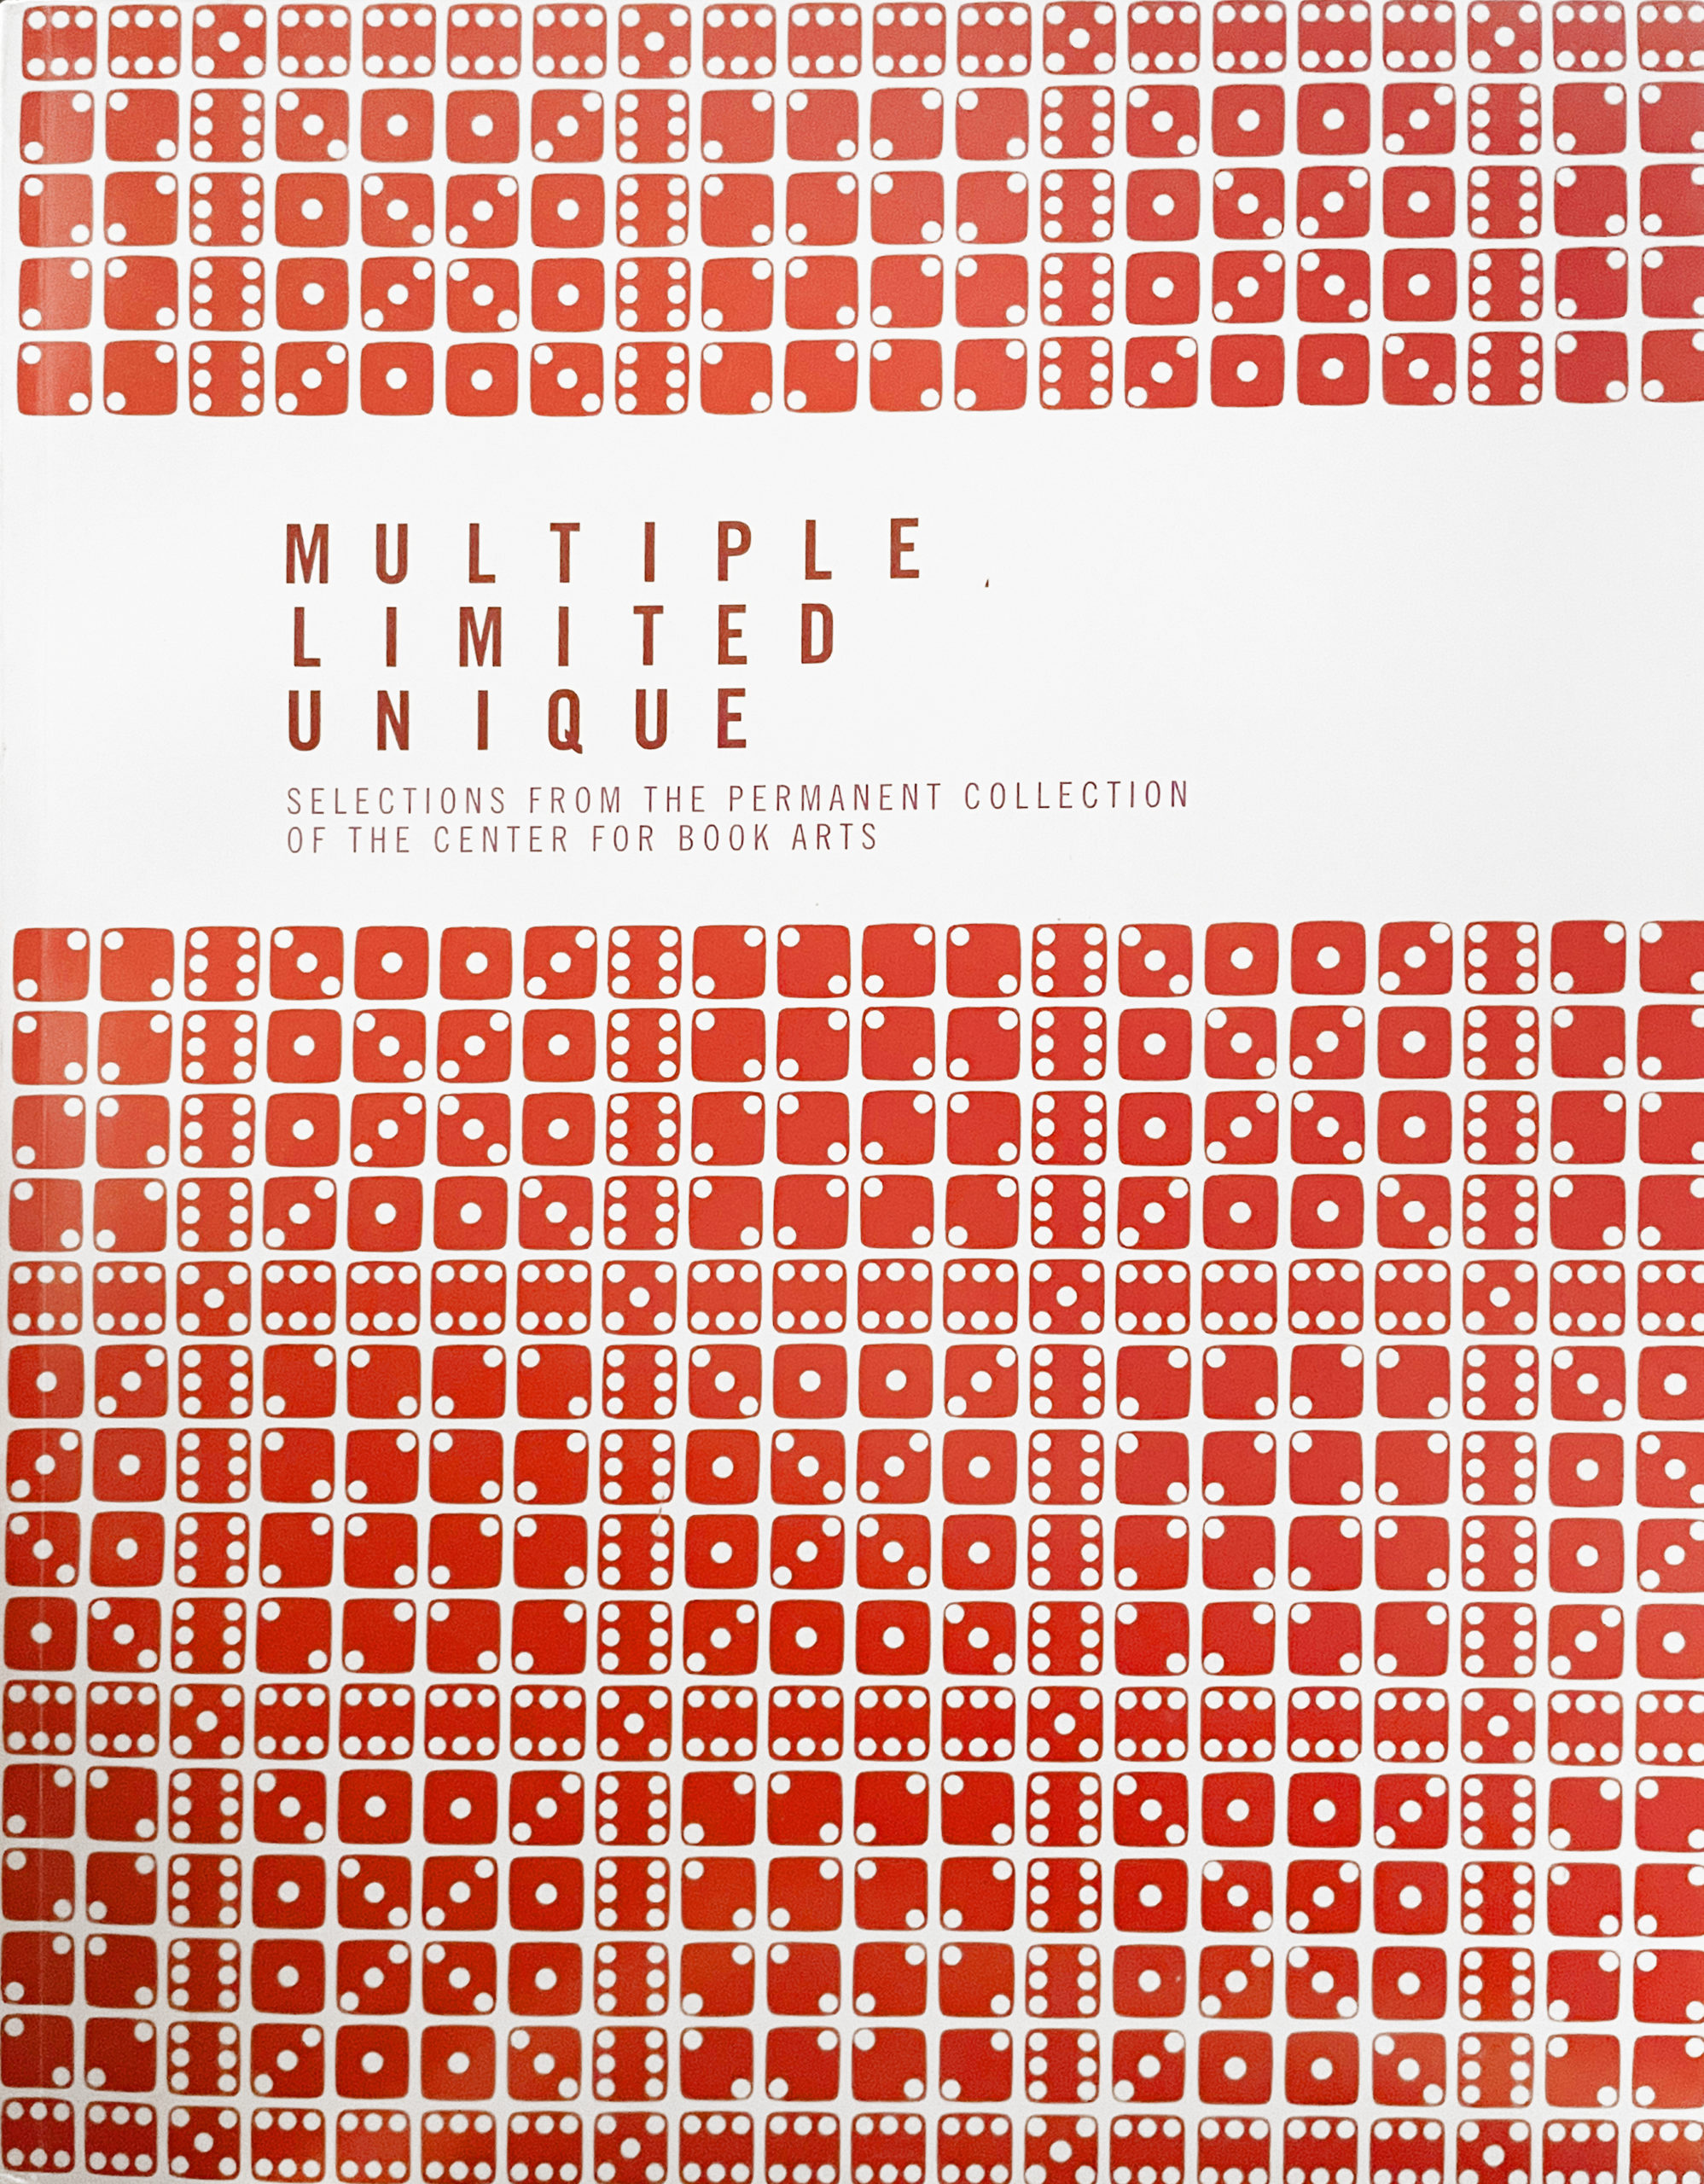 book cover with a red pattern made by printing dice